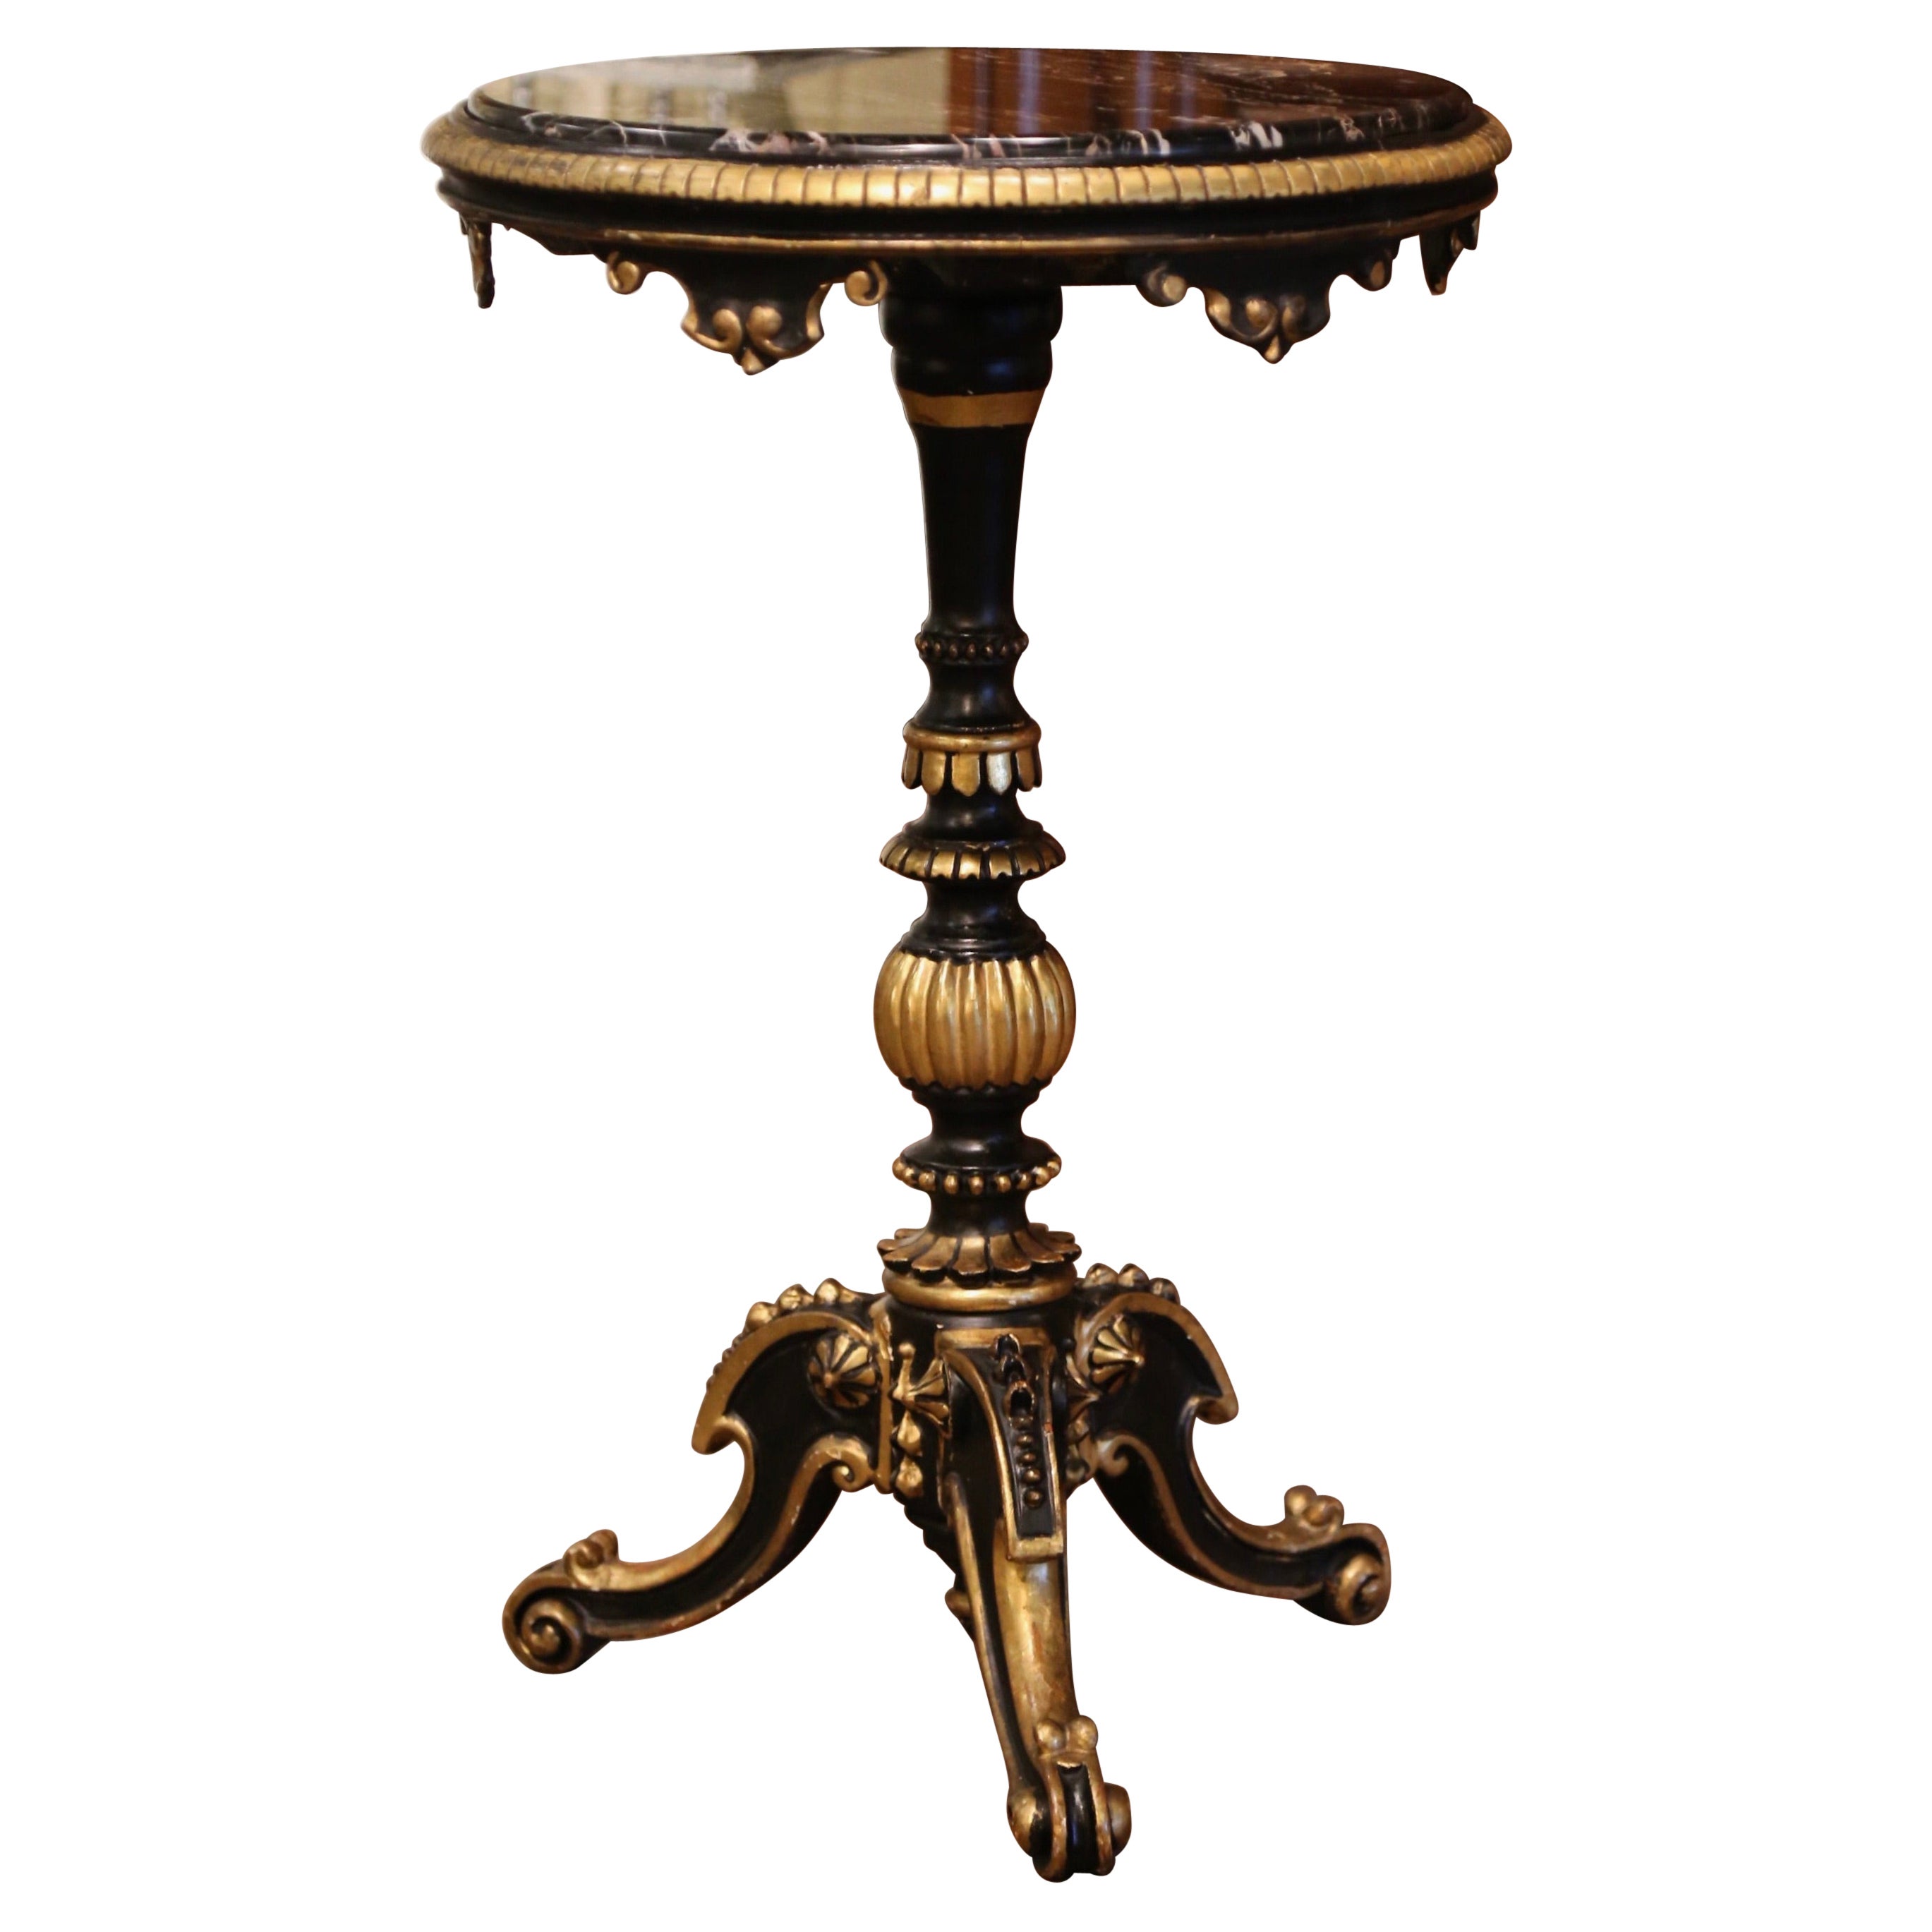 Mid-19th Century Italian Marble Top Carved Giltwood and Blackened Pedestal Table